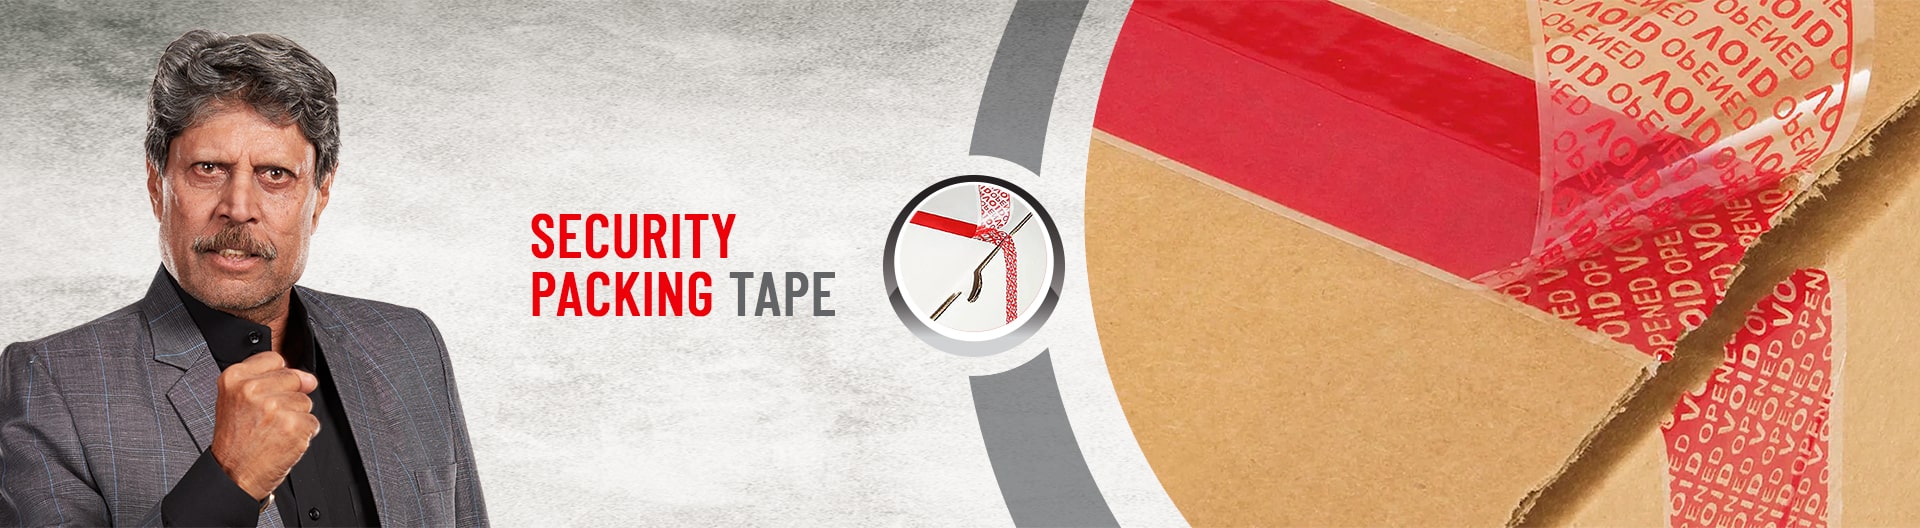 Security Packing Tape